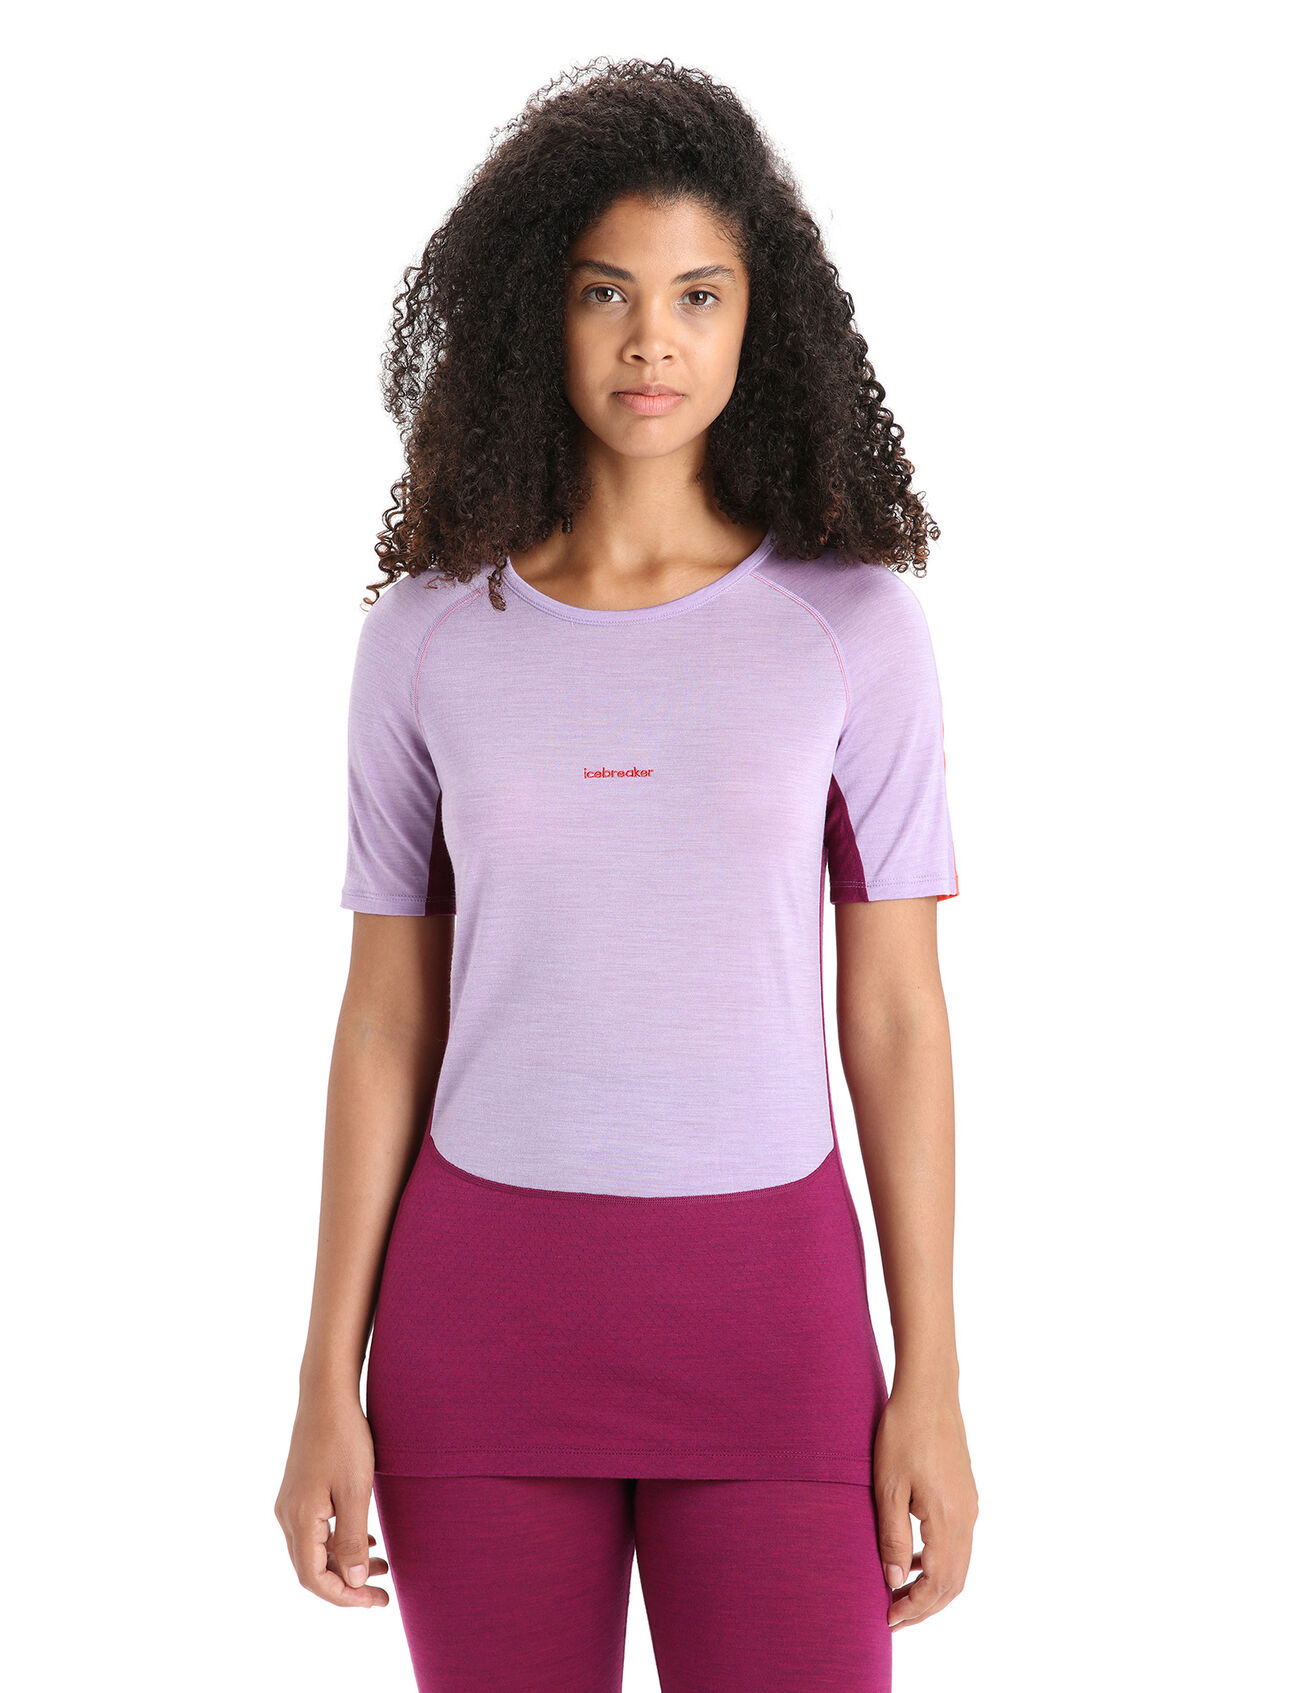 Womens 125 ZoneKnit™ Merino Short Sleeve Crewe Thermal Top An ultralight merino base layer top designed to help regulate body temperature during high-intensity activity, the 125 ZoneKnit™ Short Sleeve Crewe features our jersey Cool-Lite™ fabric for adventure and everyday training.